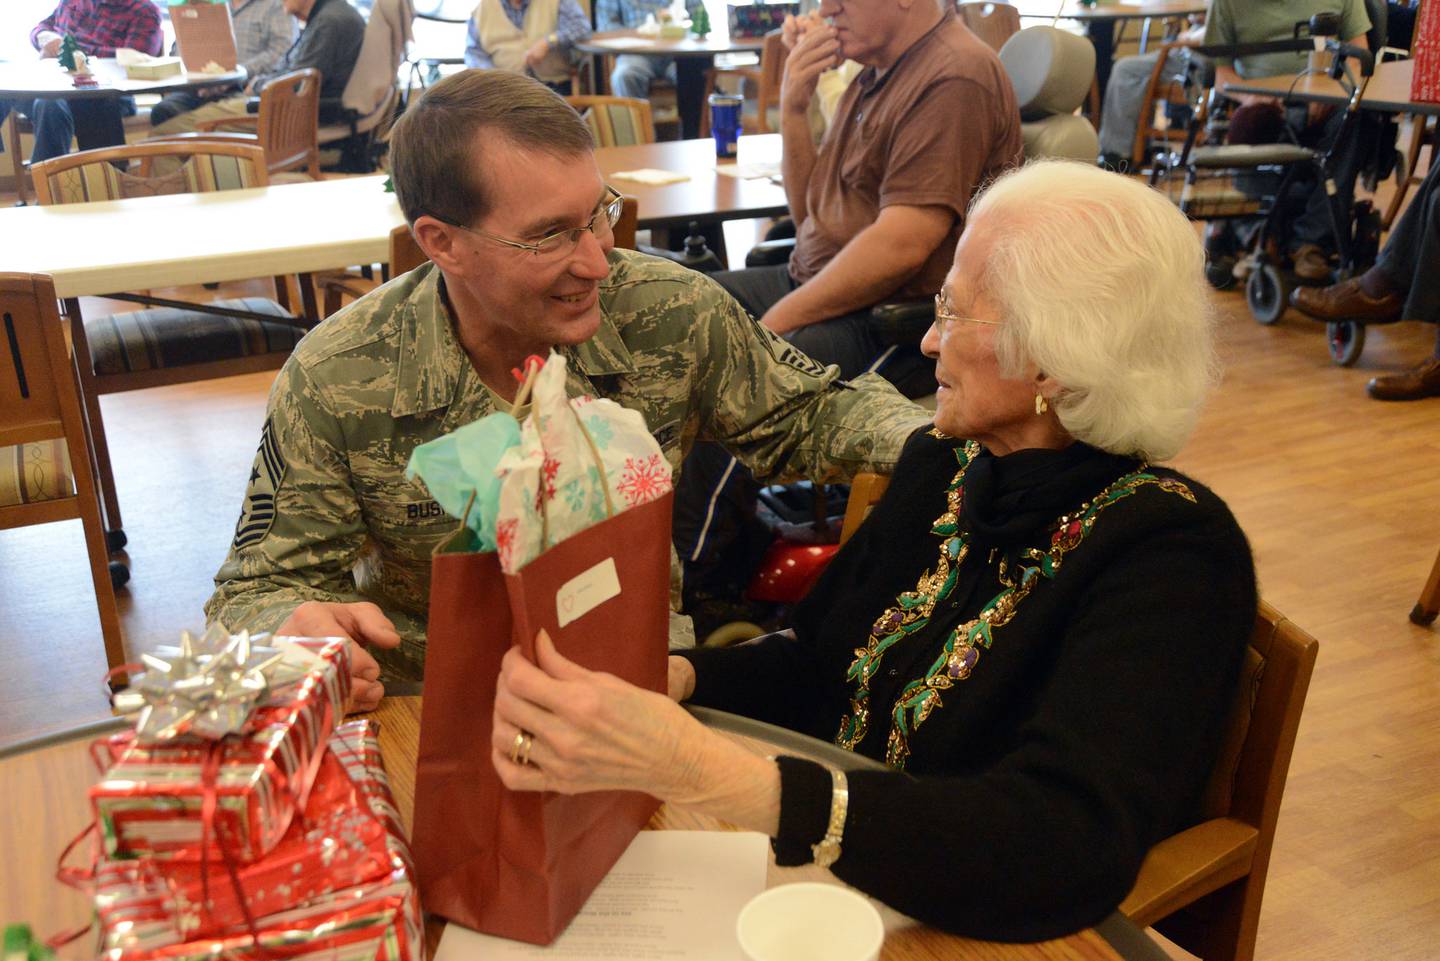 Air Force Chief Master Sgt. Ben Bush, the North Dakota National Guard State Command Chief, left, gives a gift and visits with a resident at the North Dakota Veterans Home in 2014, in Lisbon, North Dakota.